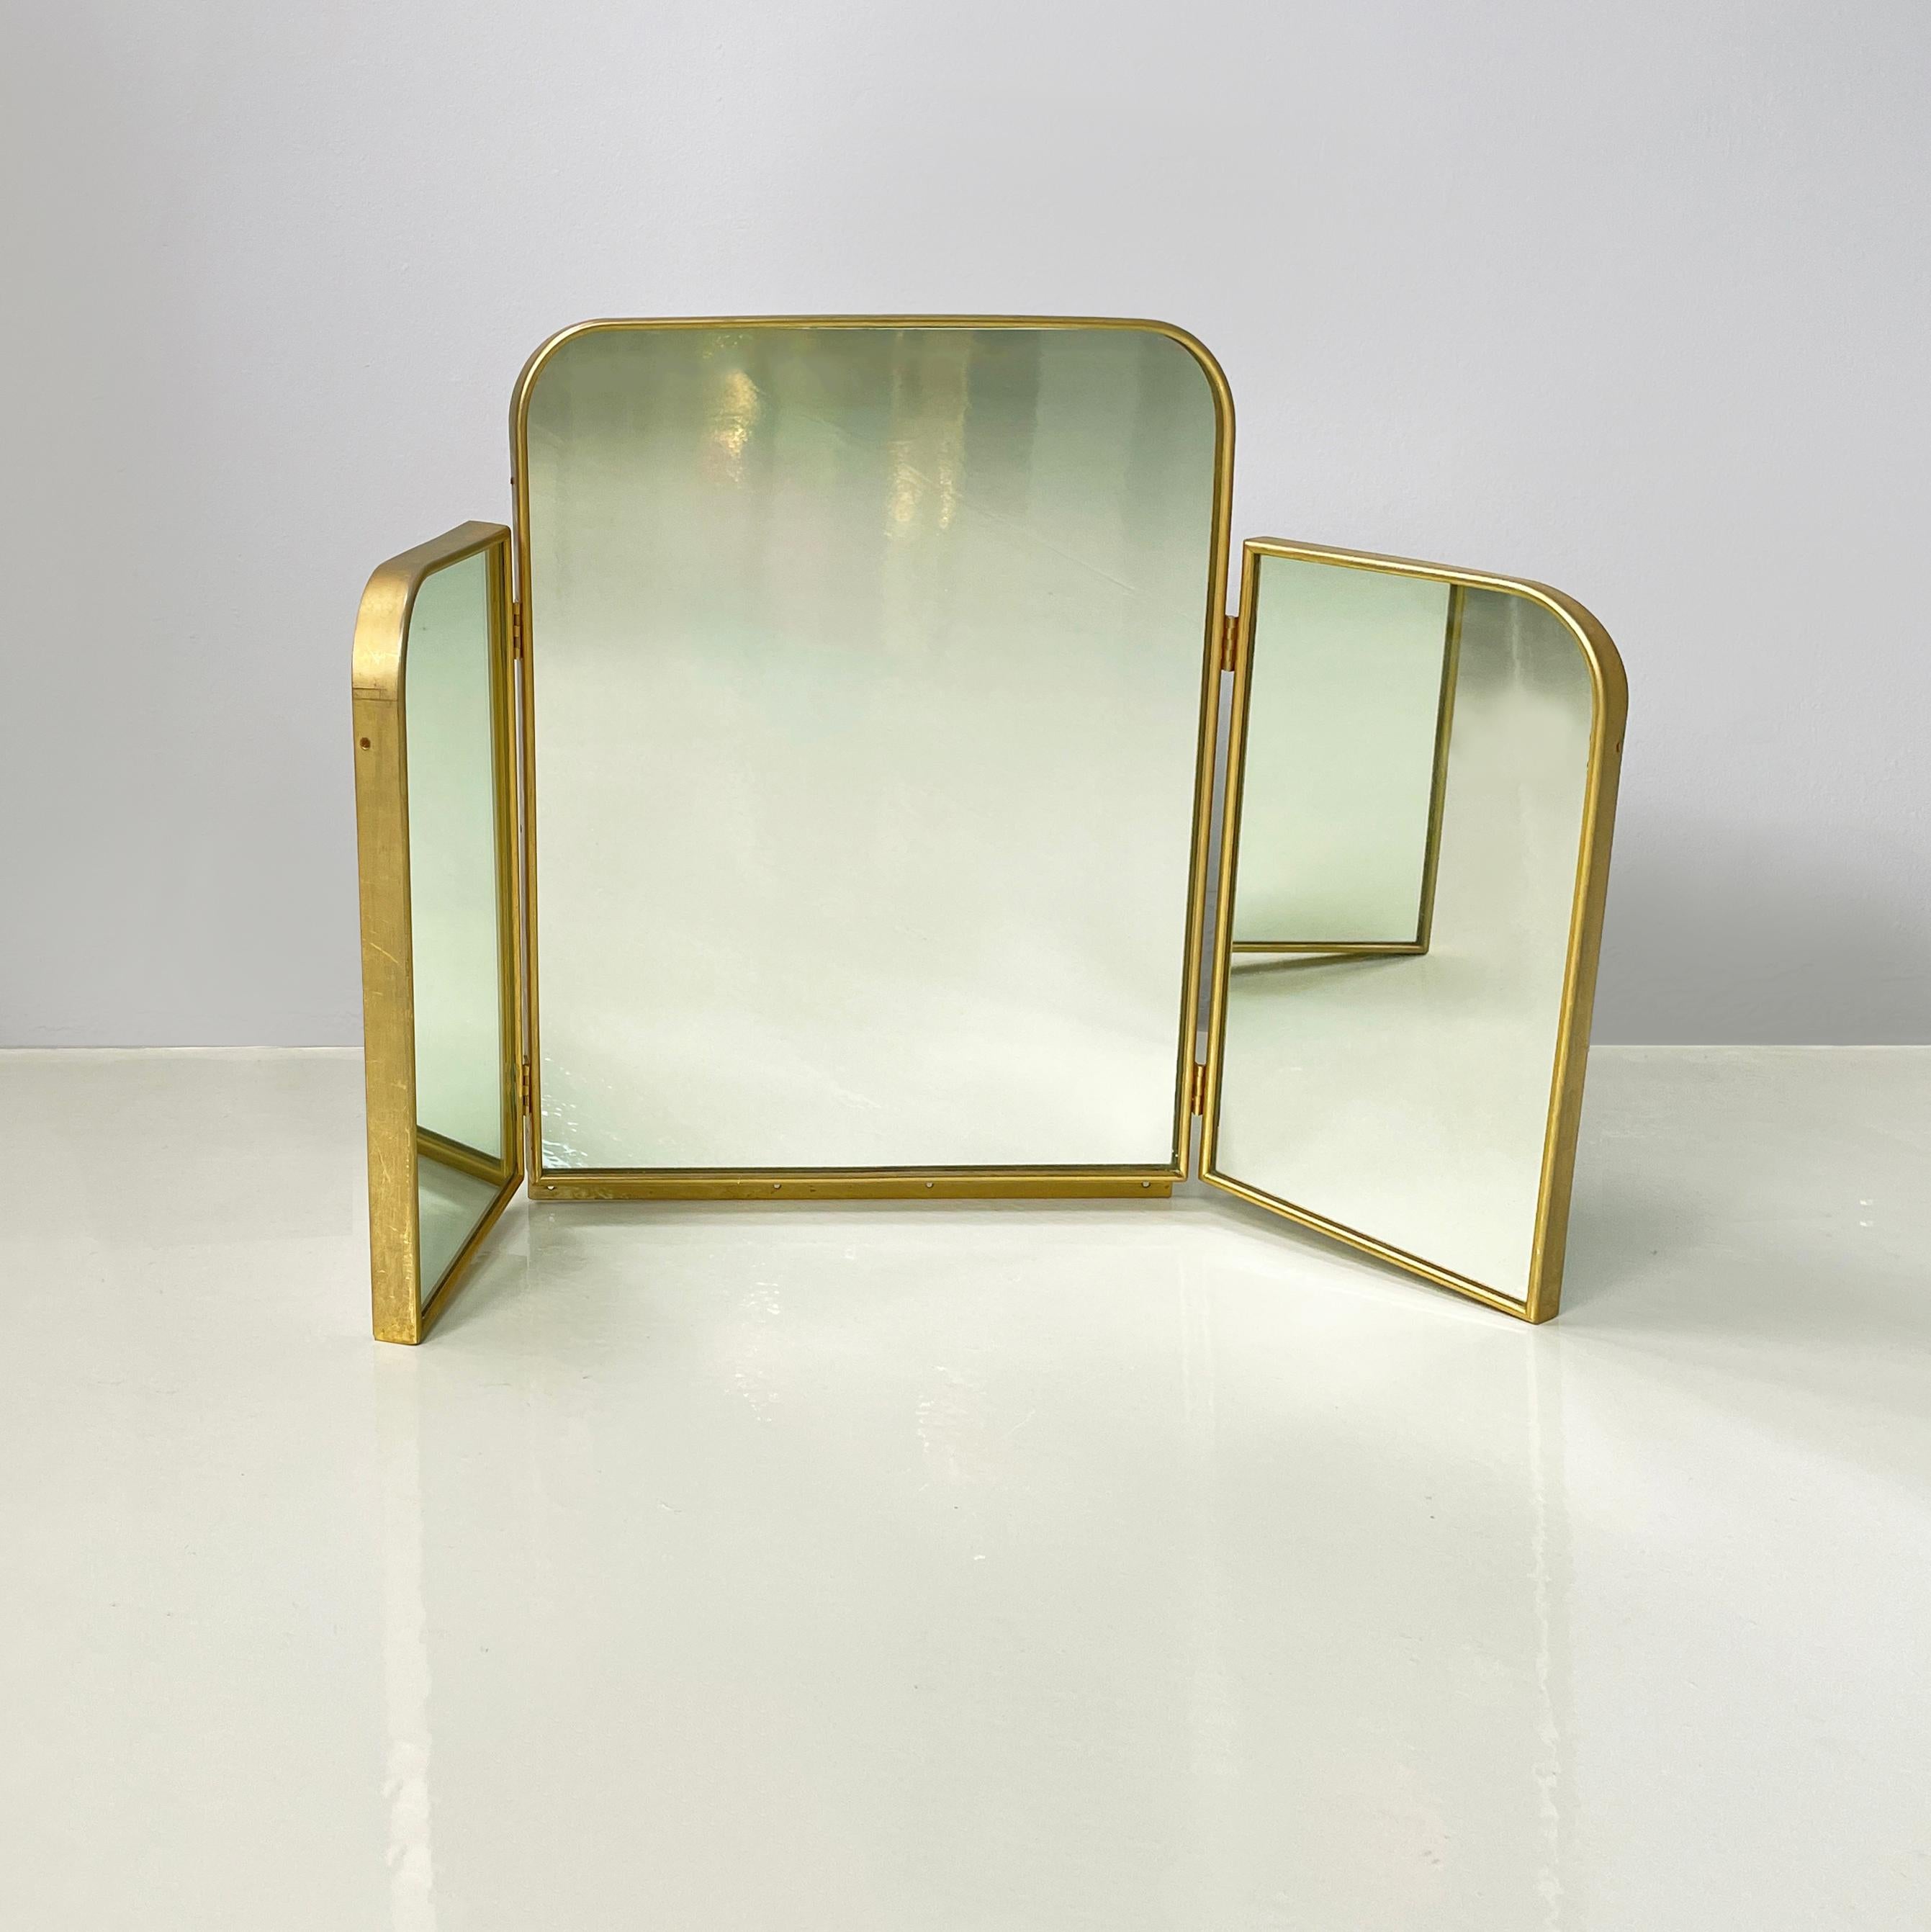 Italian mid-century modern Three-door table mirror in brass and white wood, 1950s
Three-door table mirror with white painted wooden structure and brass profiles. The 3 mirrors have a rounded upper edge. It can be used as a console mirror, dressing